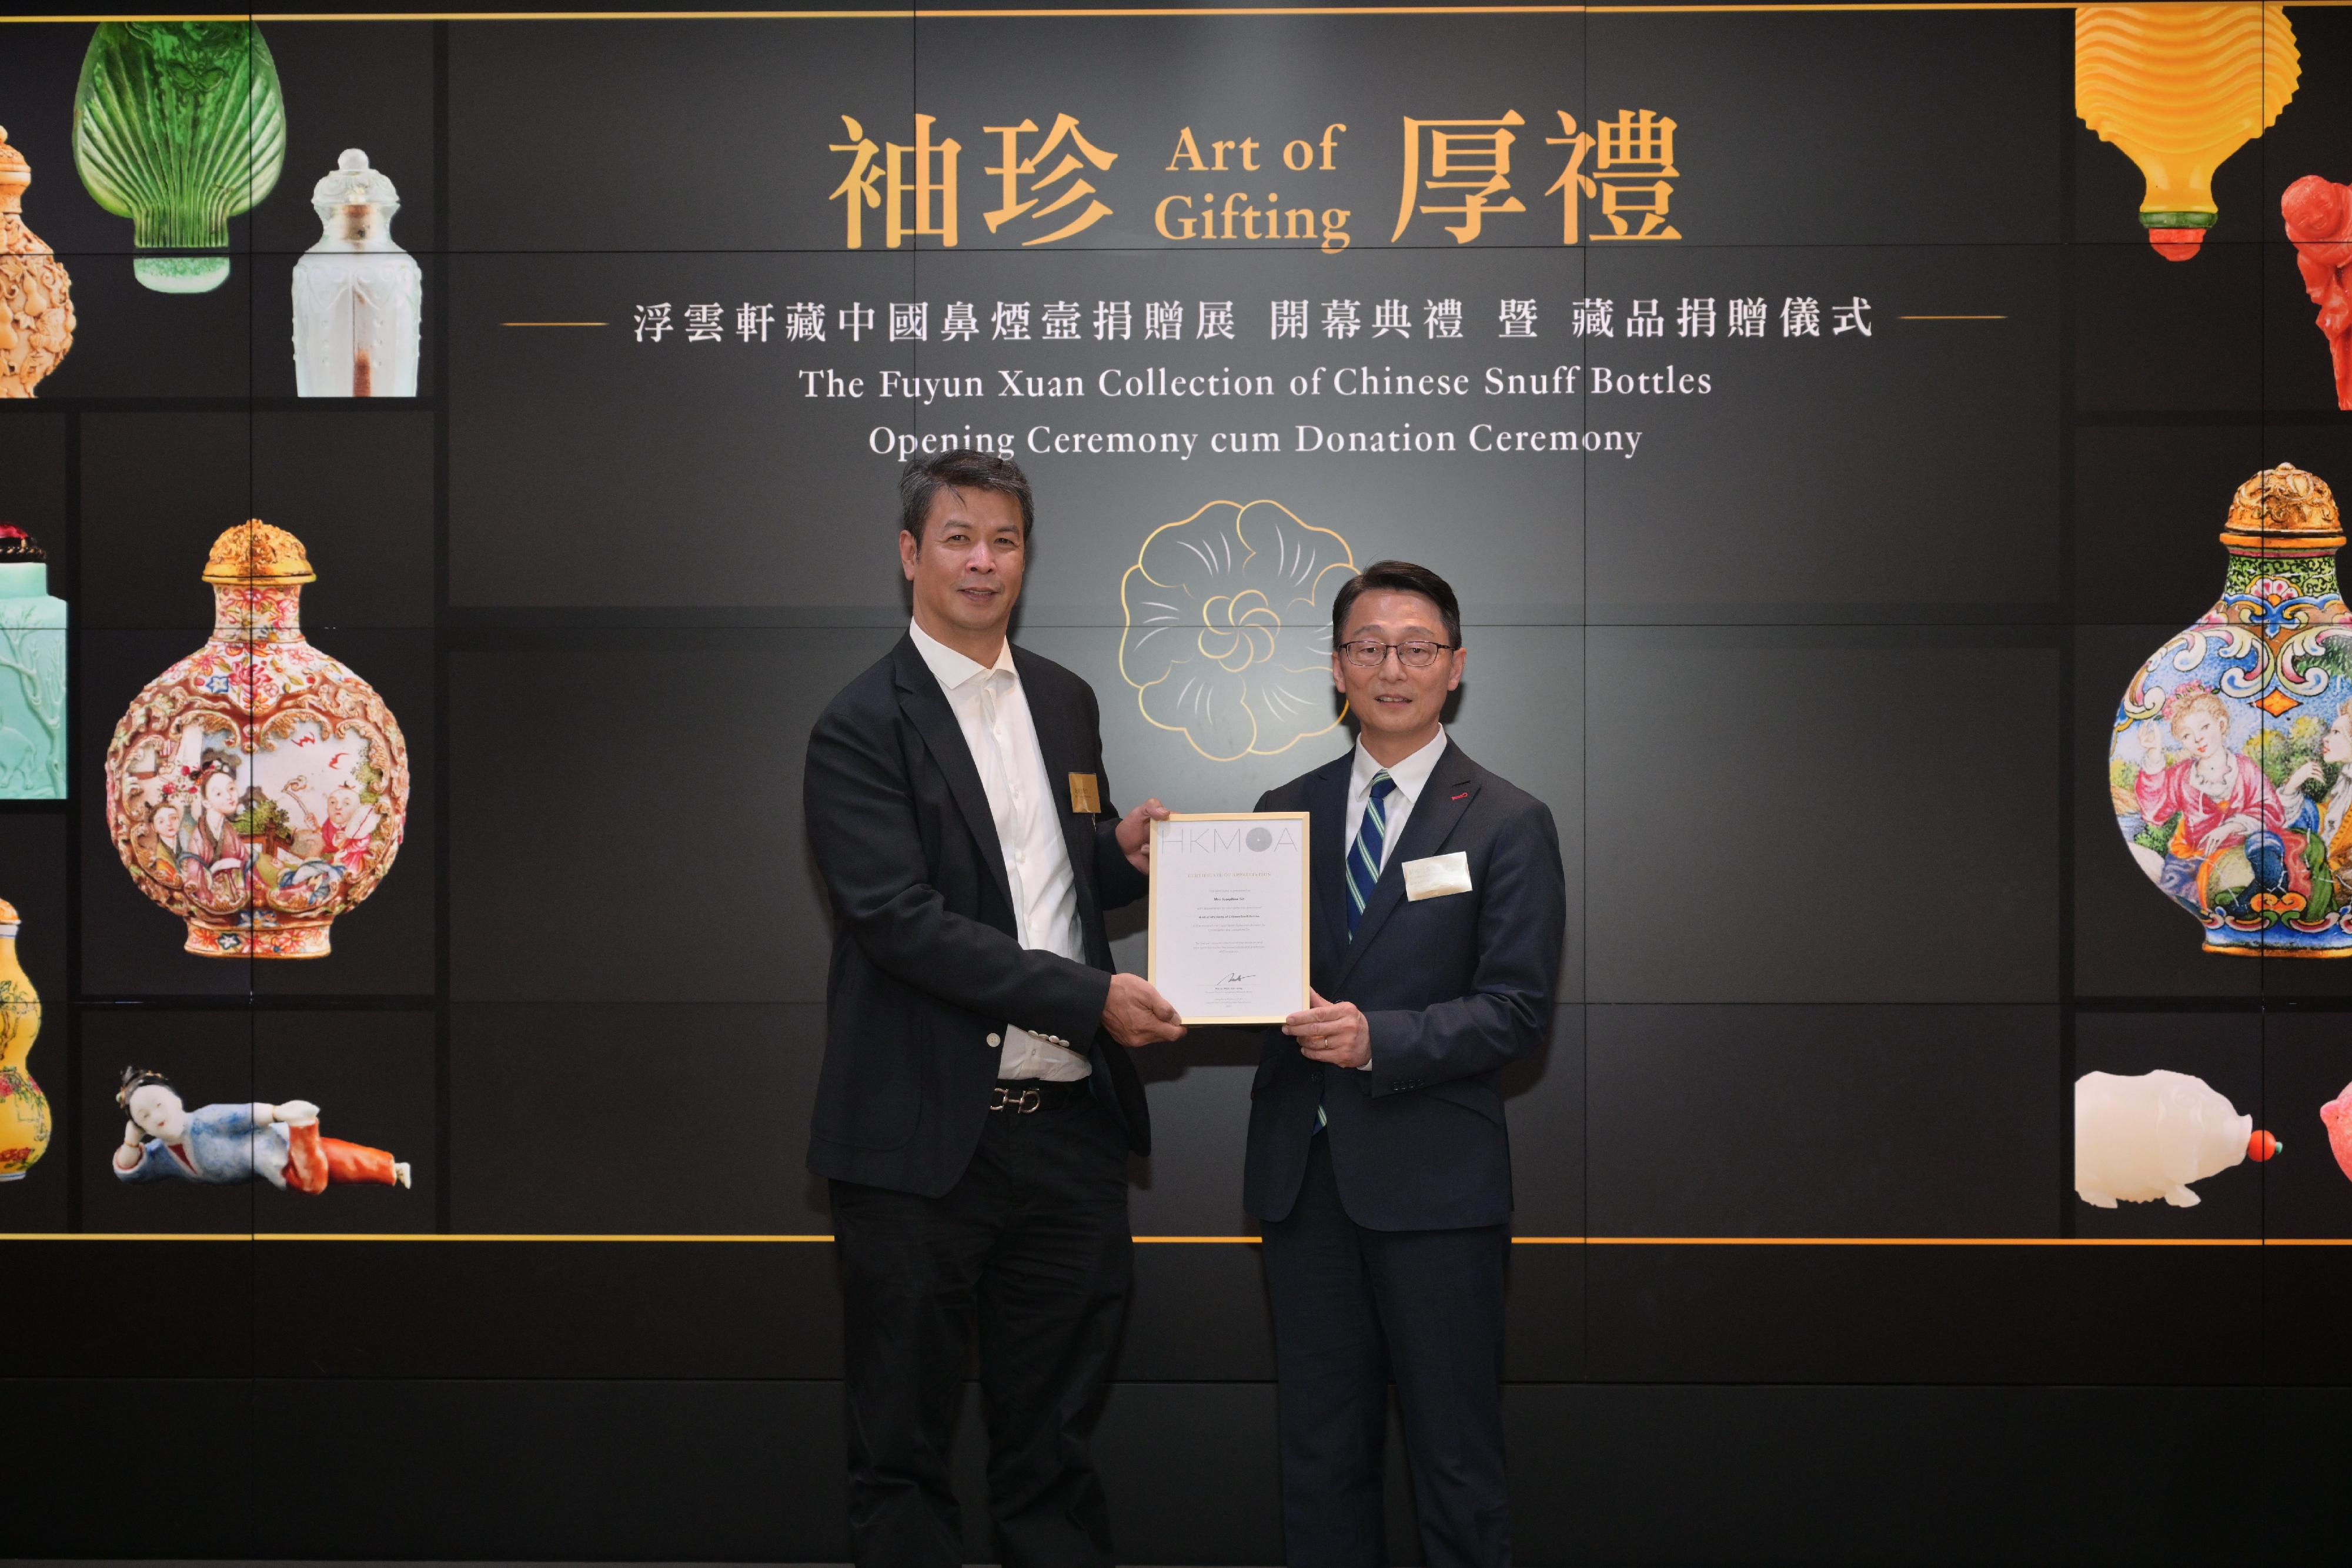 The opening ceremony of the "Art of Gifting: The Fuyun Xuan Collection of Chinese Snuff Bottles" exhibition and donation ceremony was held today (April 11) at the Hong Kong Museum of Art. Photo shows the Director of Leisure and Cultural Services, Mr Vincent Liu (right), presenting a Certificate of Appreciation to the son of Mr Christopher Sin and Mrs Josephine Sin, Mr Nicholas Sin.